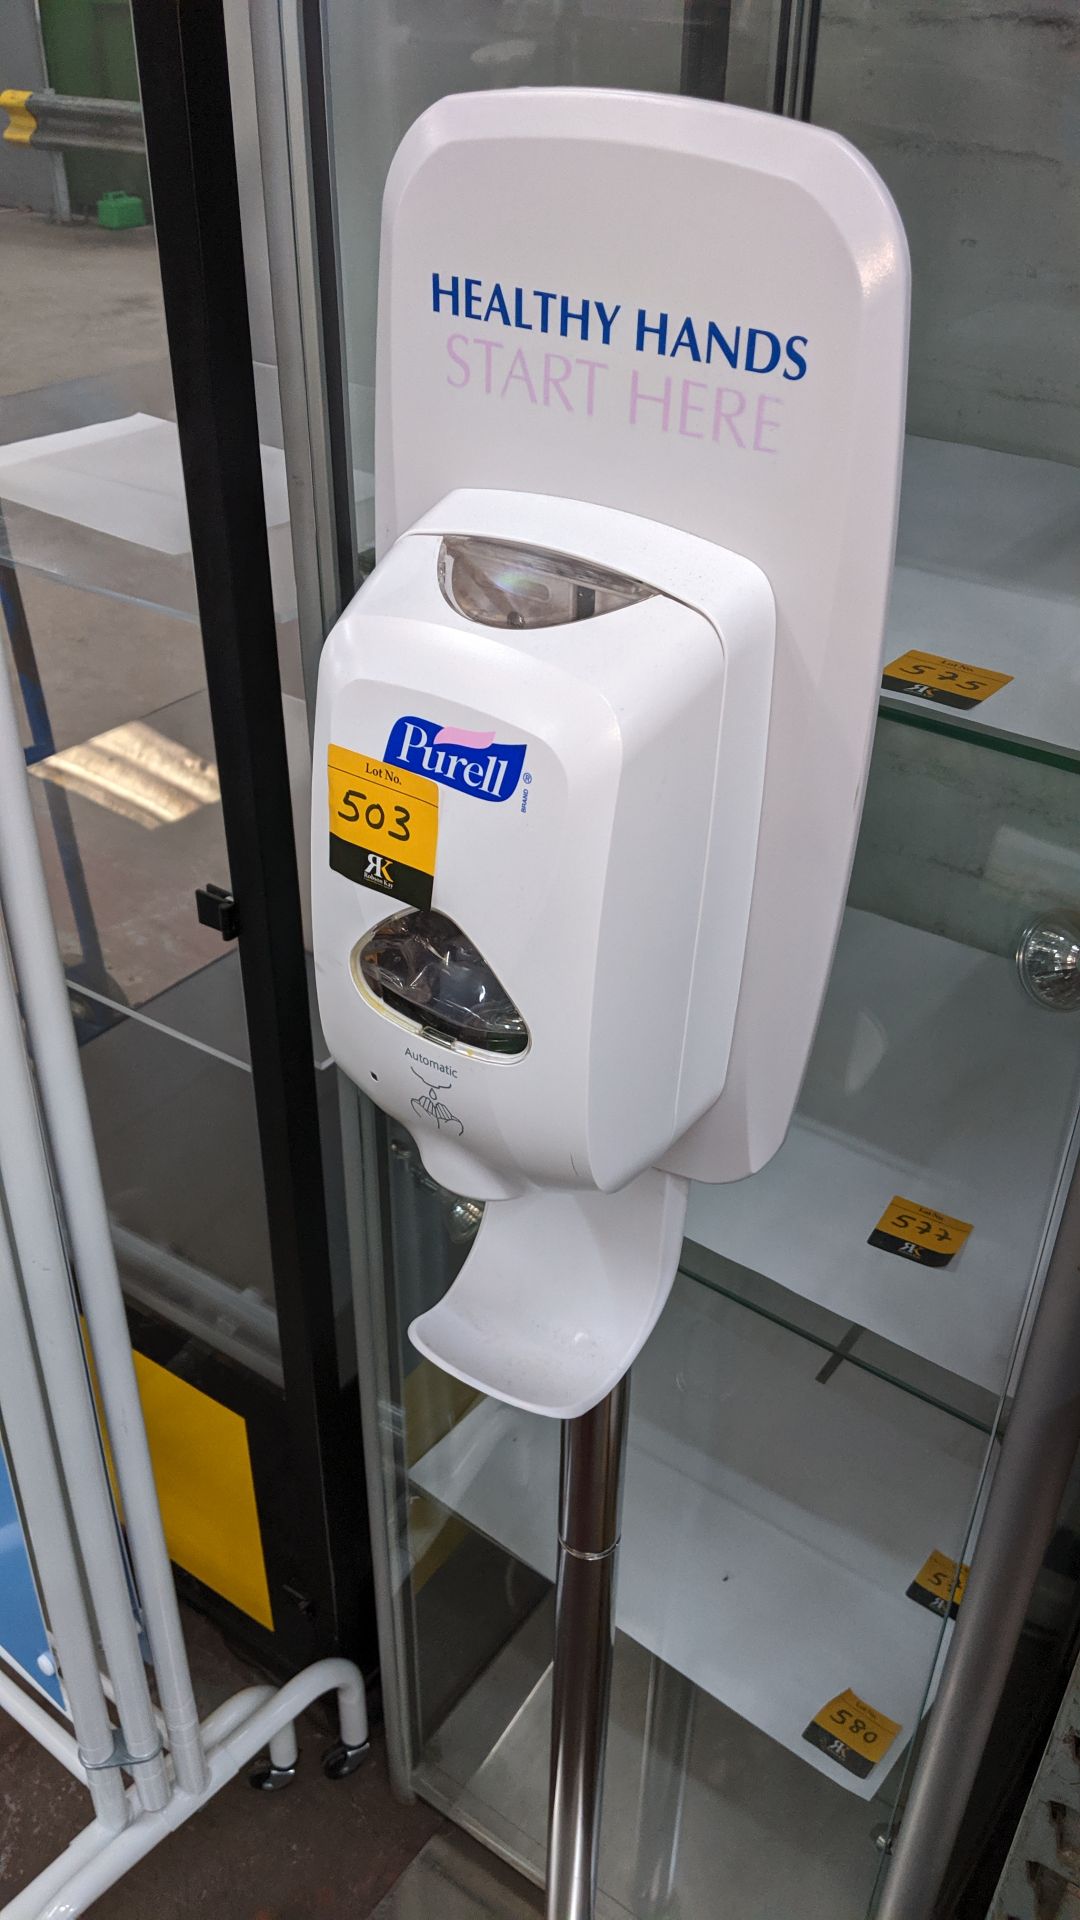 Purell floor standing hand sanitizer dispensing device. This is one of a large number of lots used/ - Image 3 of 3